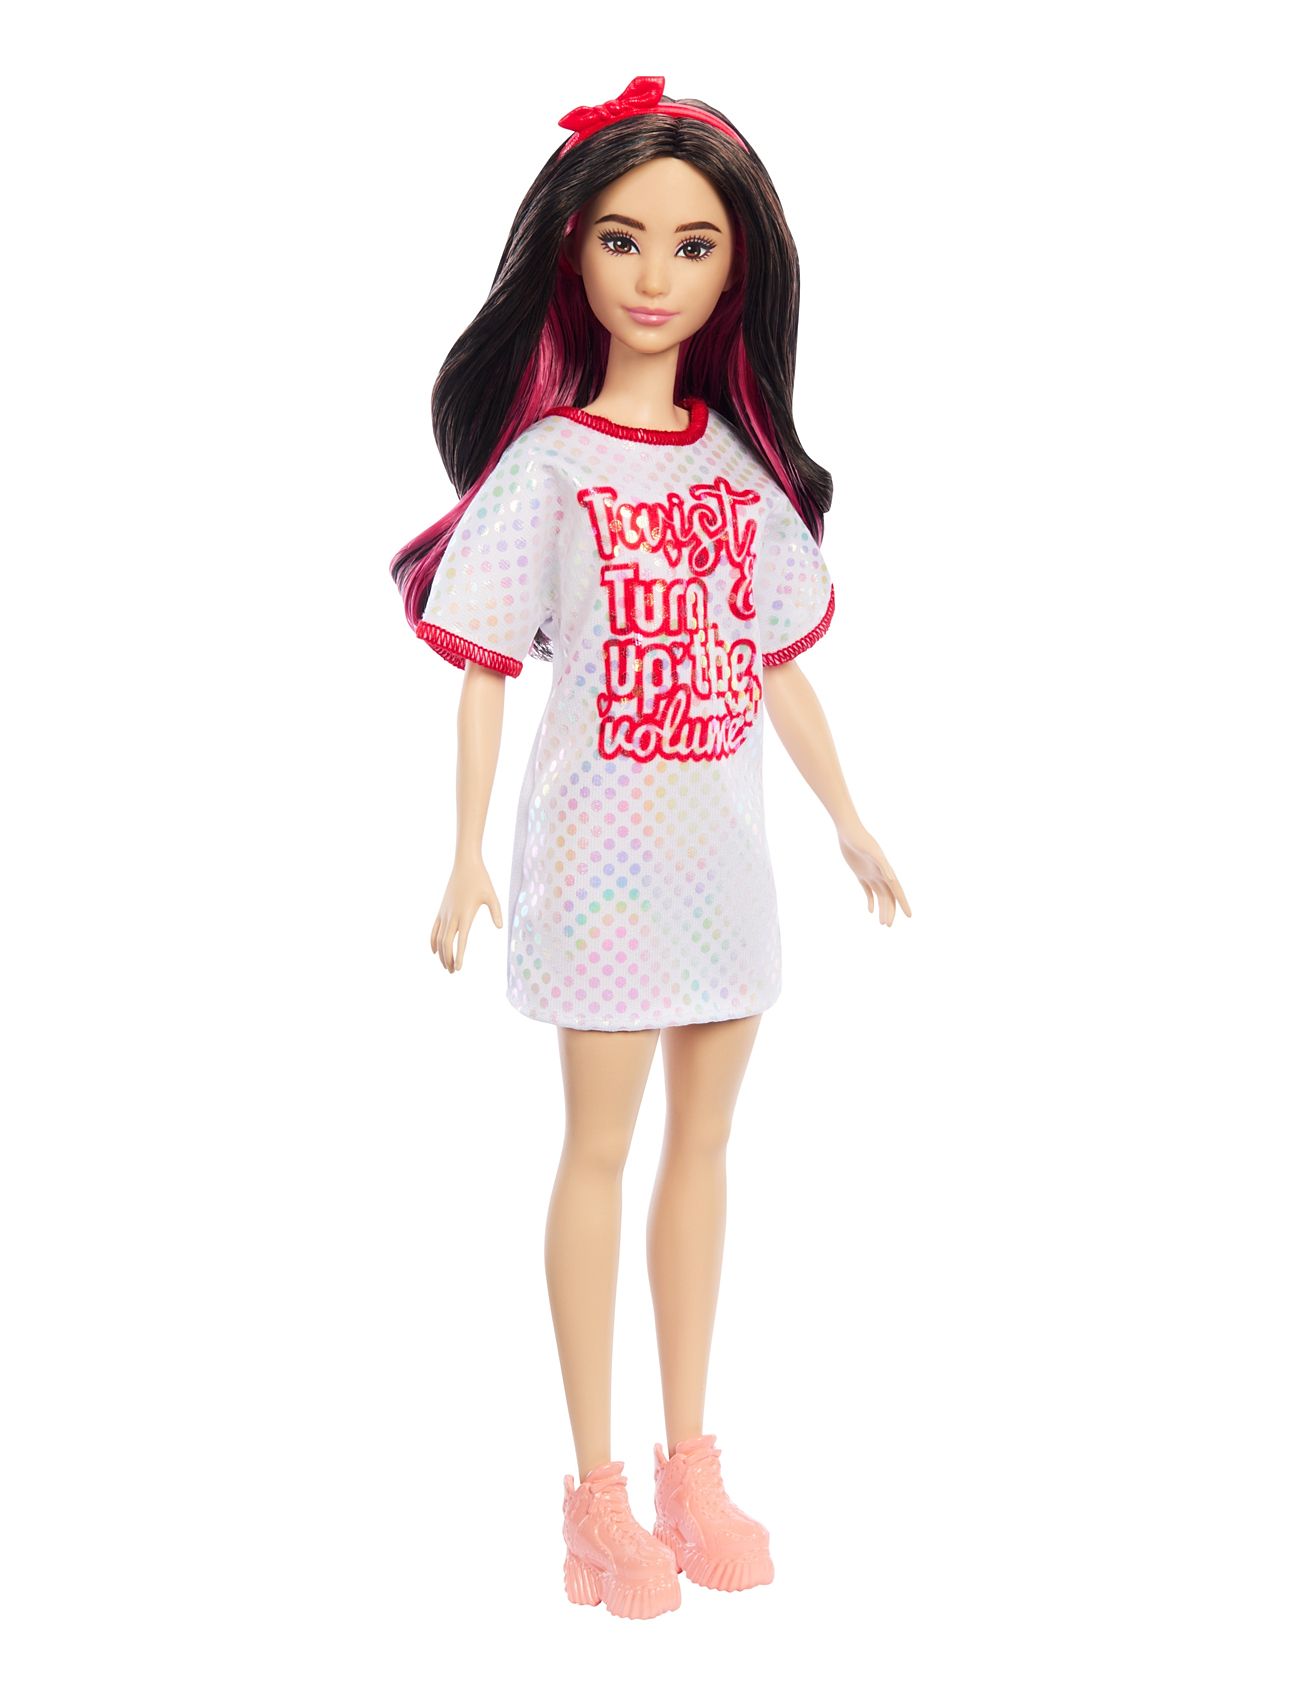 Fashionistas Doll Toys Dolls & Accessories Dolls Multi/patterned Barbie